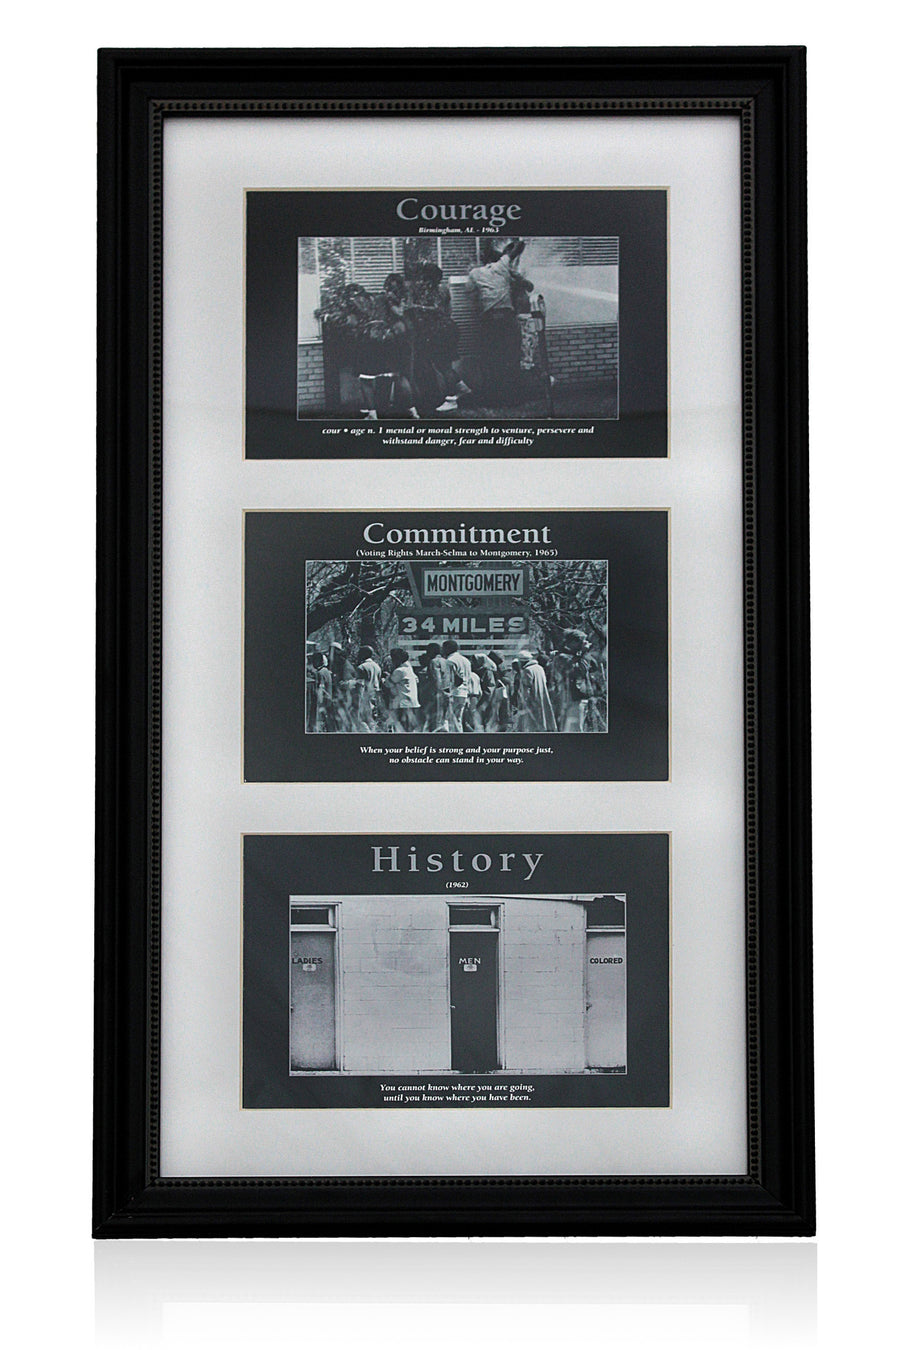 Courage, Commitment and History by D'azi Productions (Black Frame)